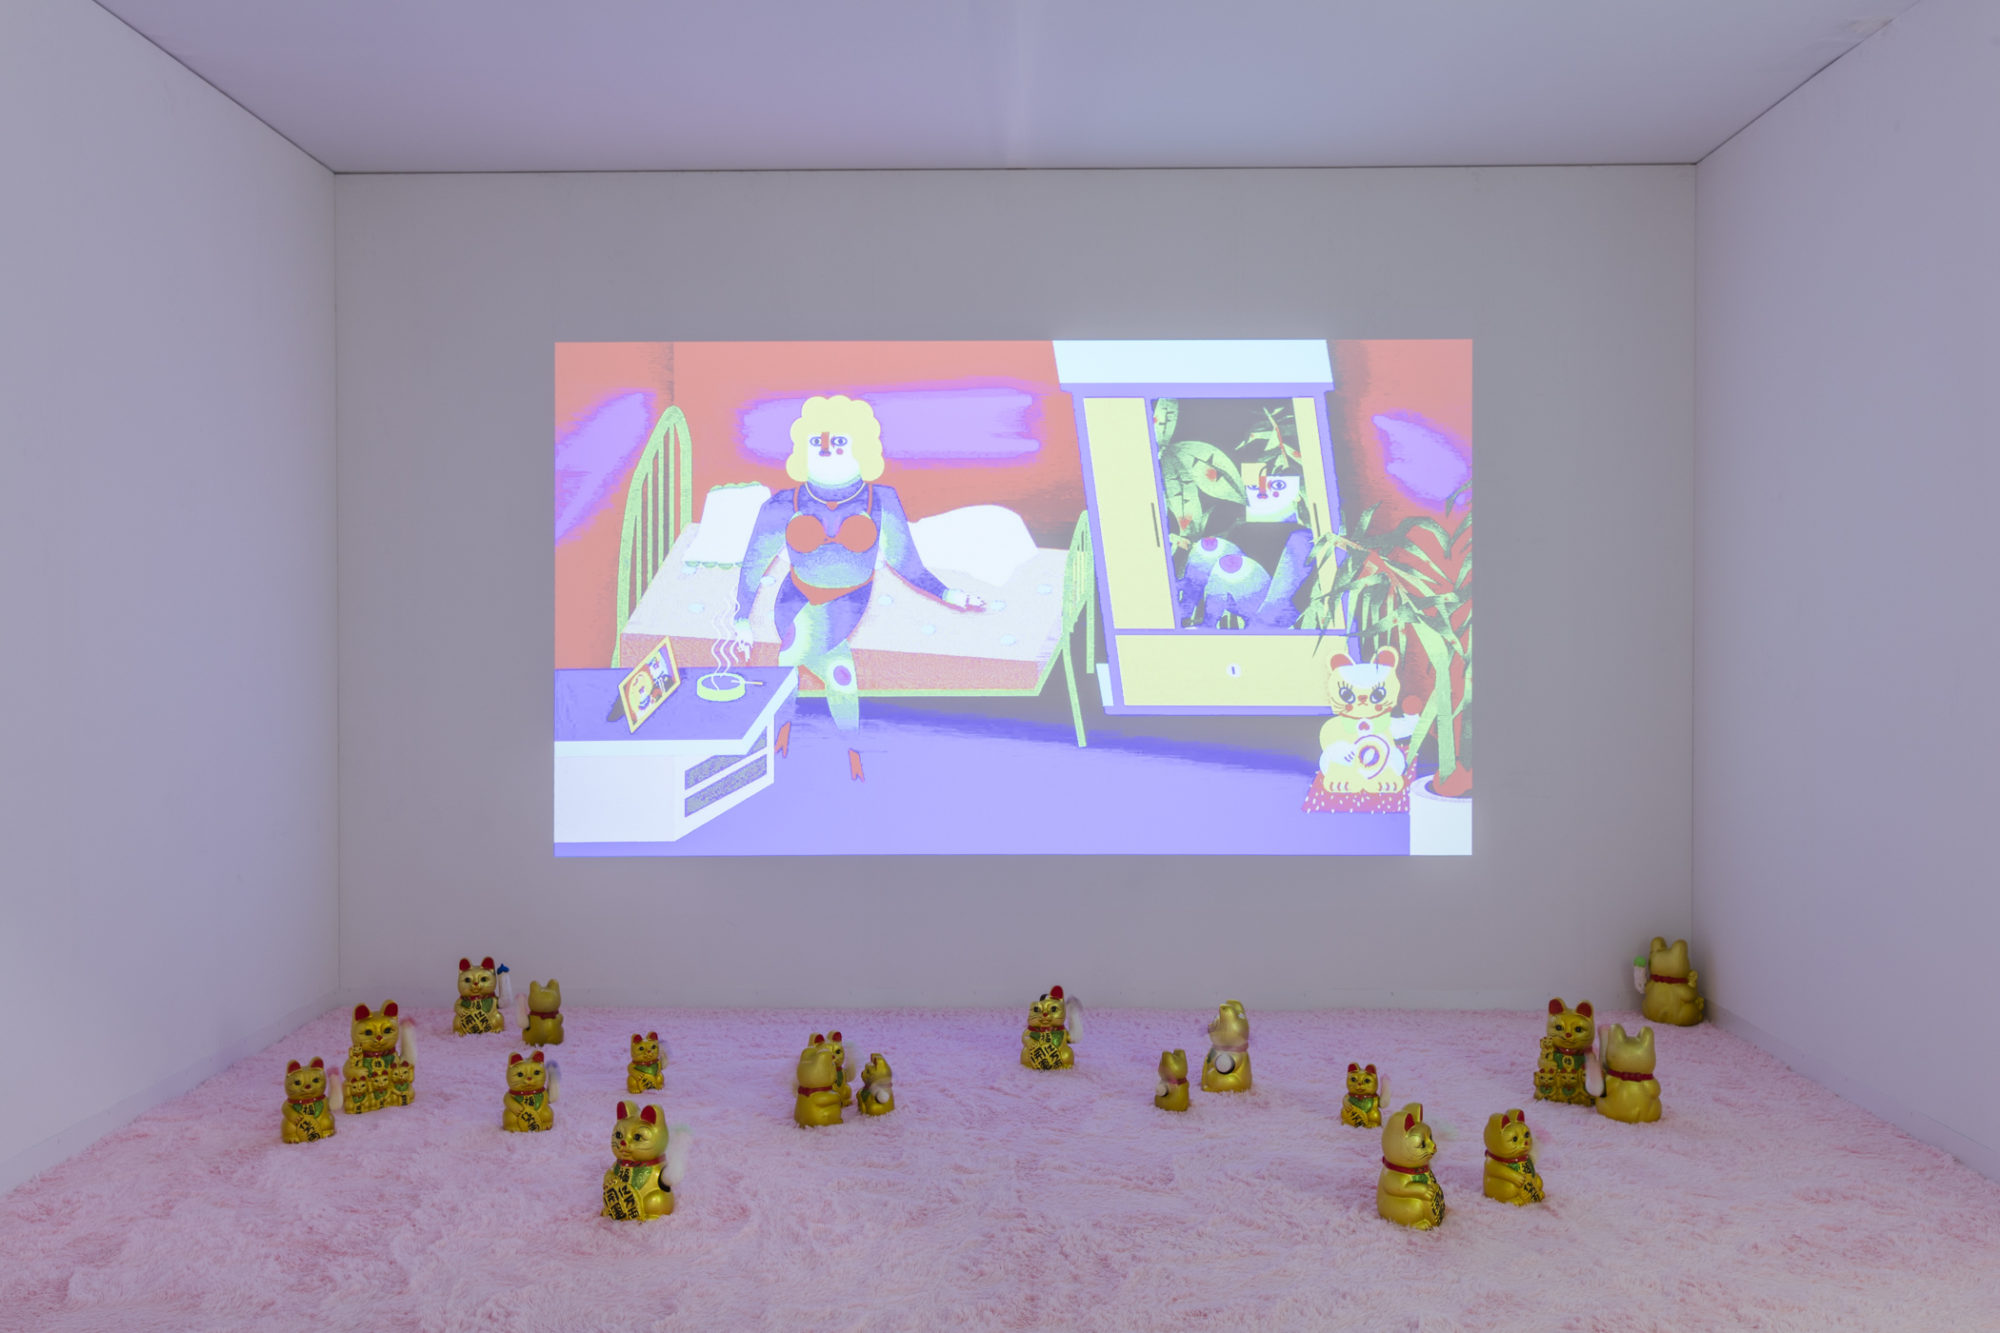 An installation with colorful artwork projected on the wall and fortune cats scattered on a pink carpet